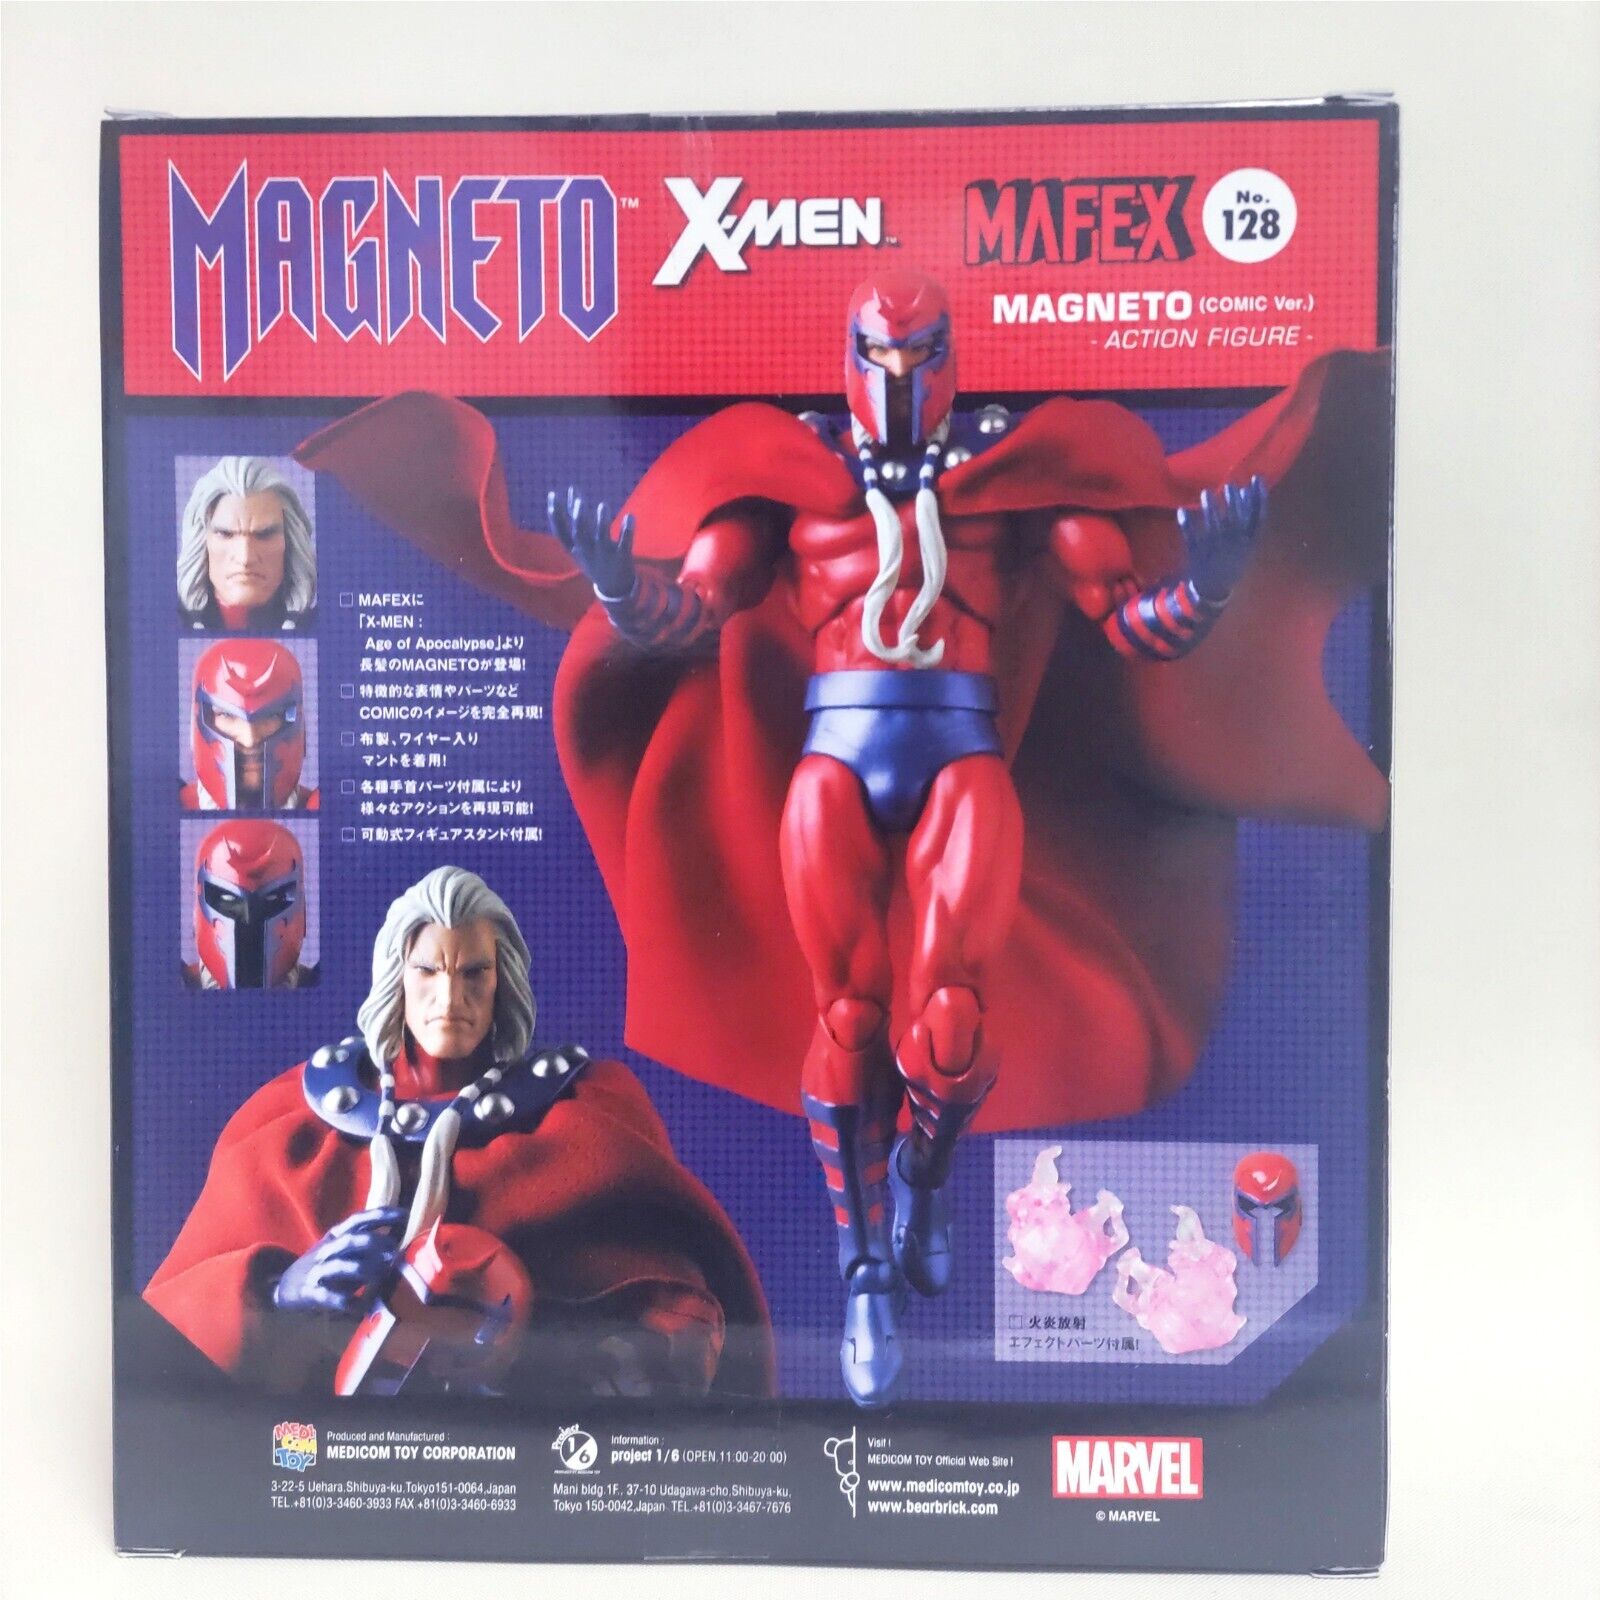 Medicom Toy MAFEX X-MEN MAGNETO COMIC Ver. Painted action figure No.128 New